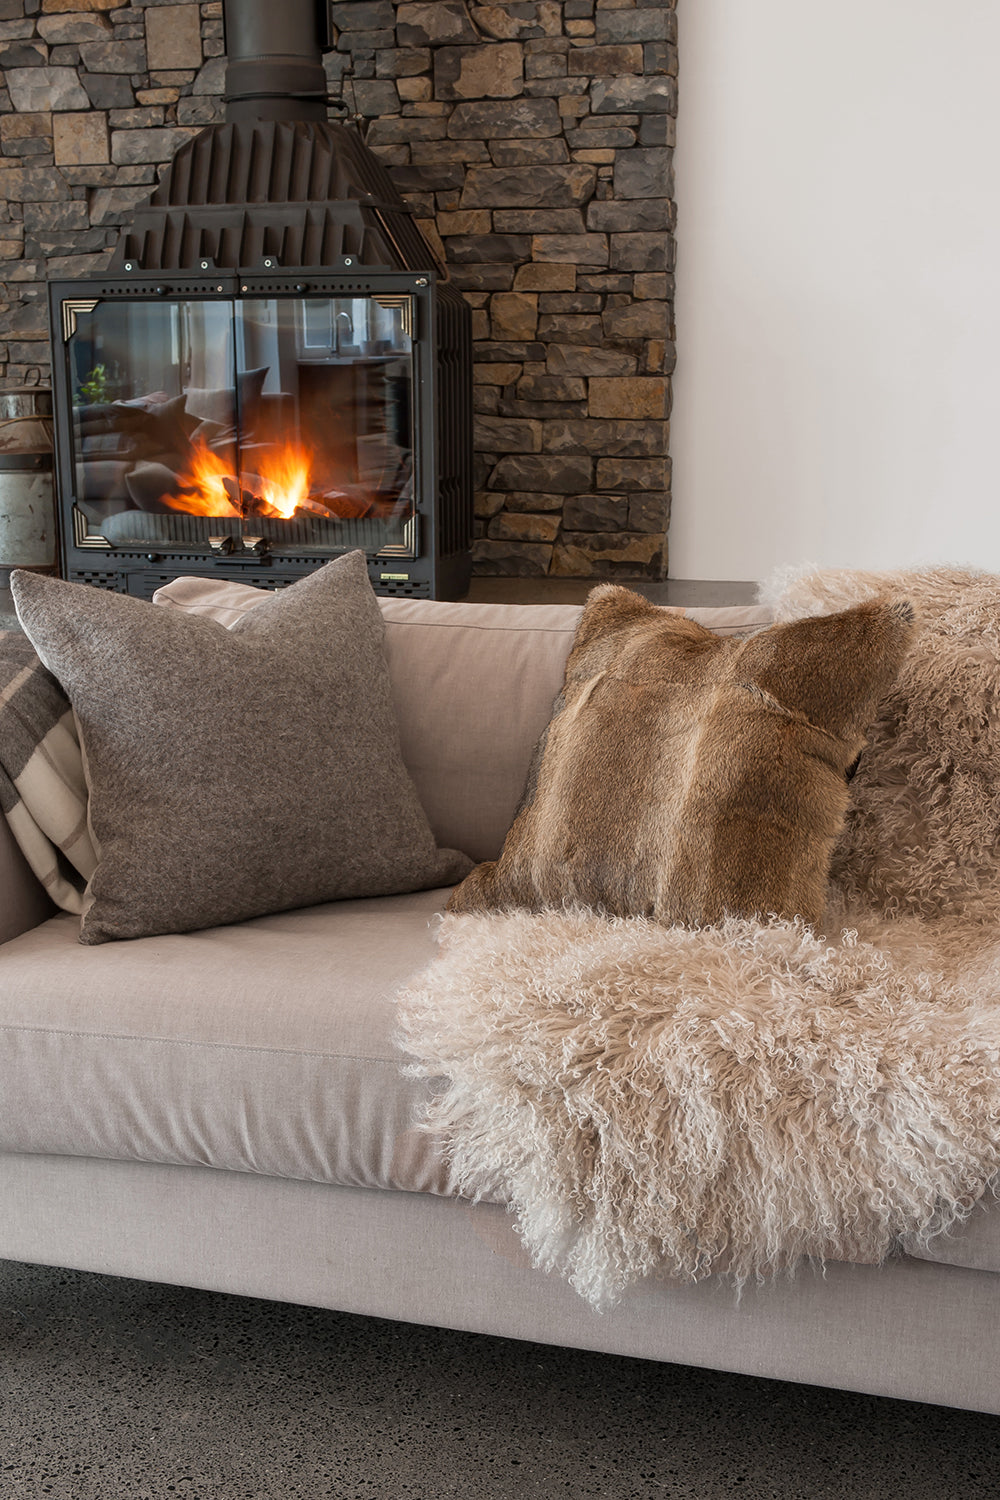 Rabbit Fur Cushion Natural Straw by Collezione Natura are available from Make Your House A Home Stockist. Furniture Store Bendigo, Victoria. Australia Wide Delivery. Furtex Heirloom Baya.